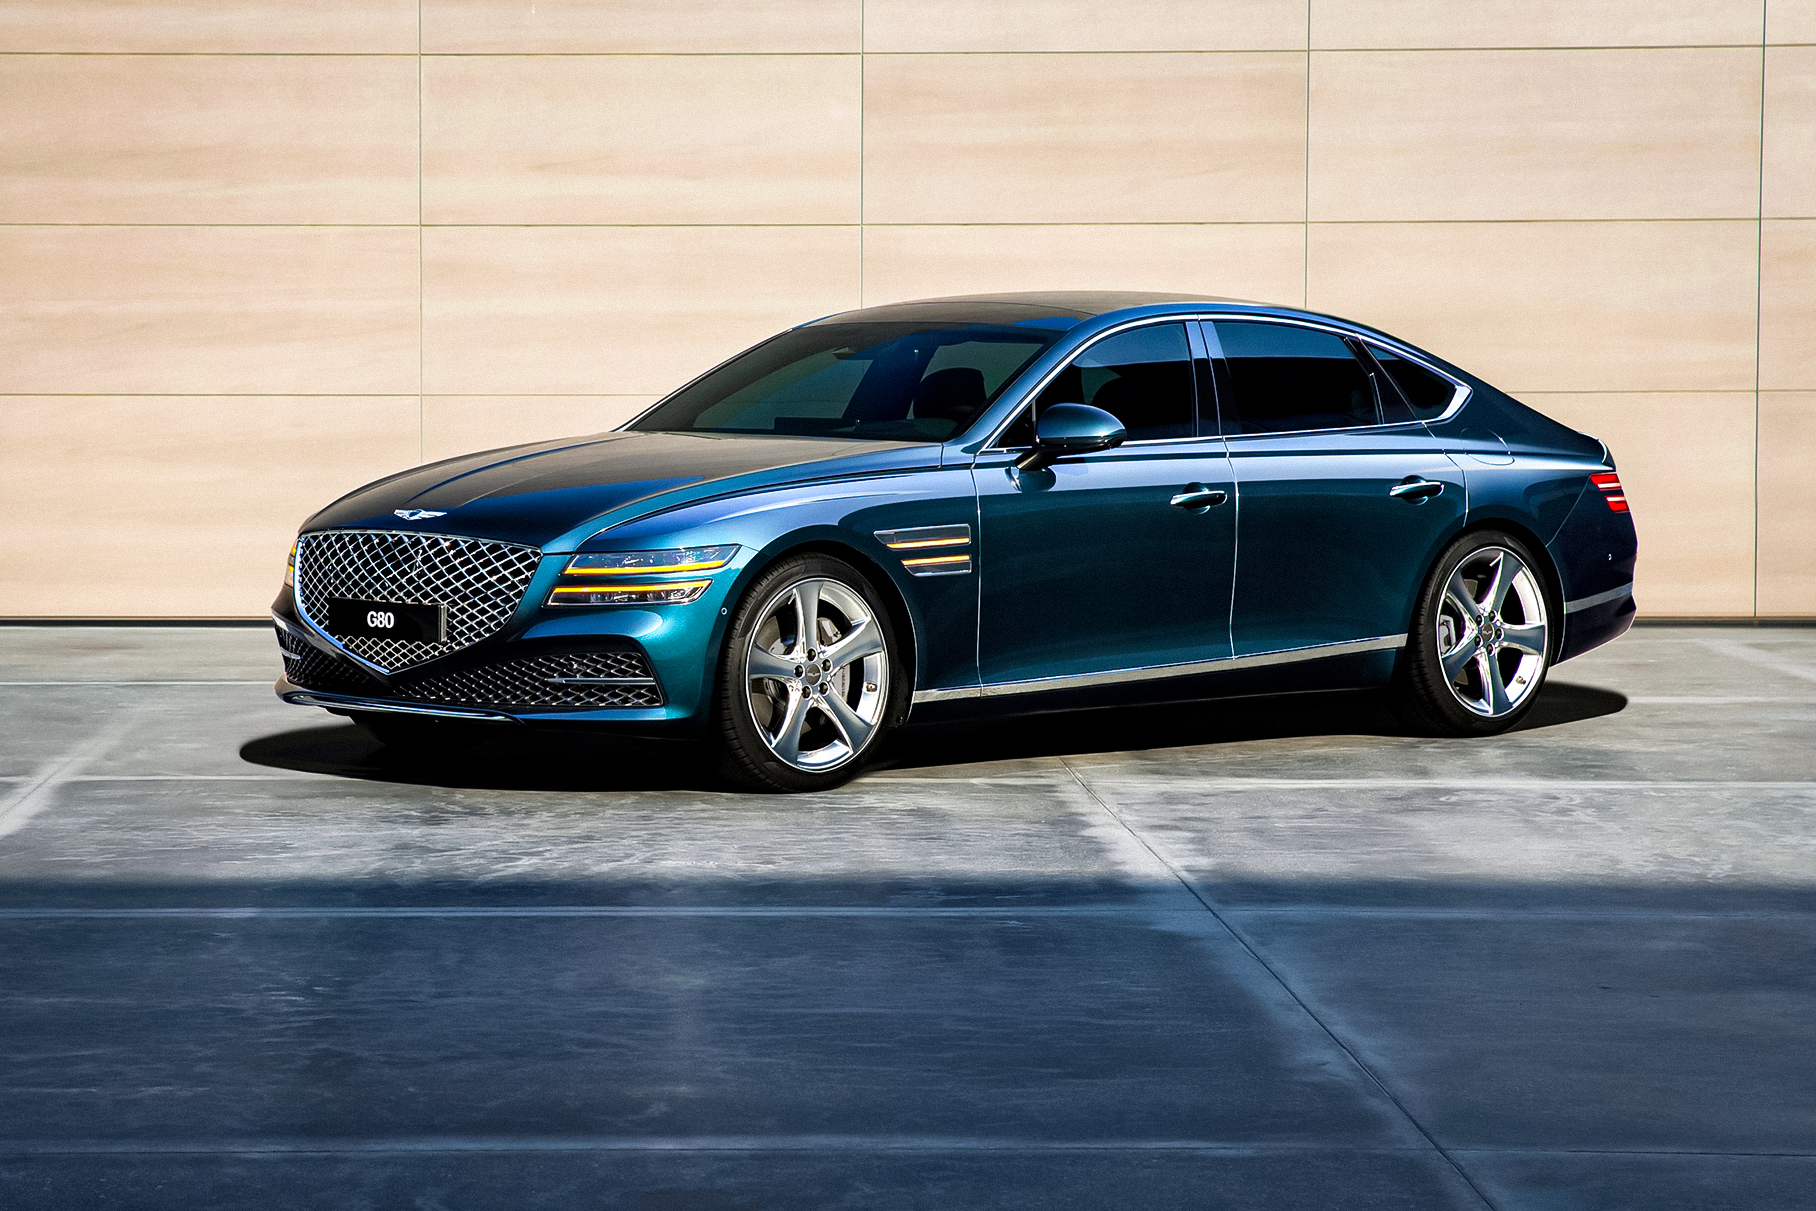 The Genesis brand has sold more than a million cars worldwide